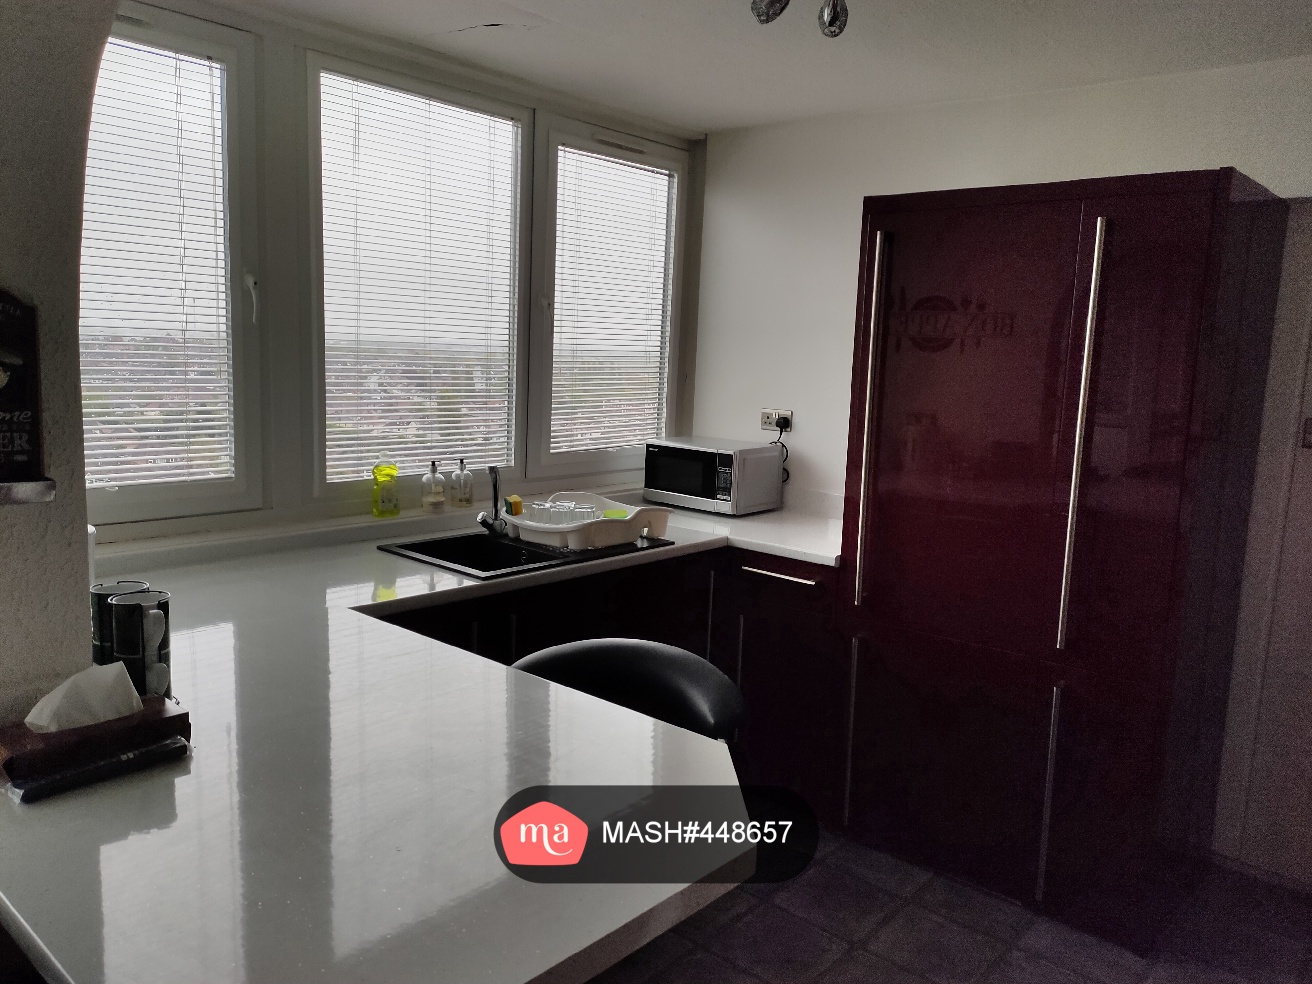 2 Bedroom Flat to rent in Coventry - Mashroom